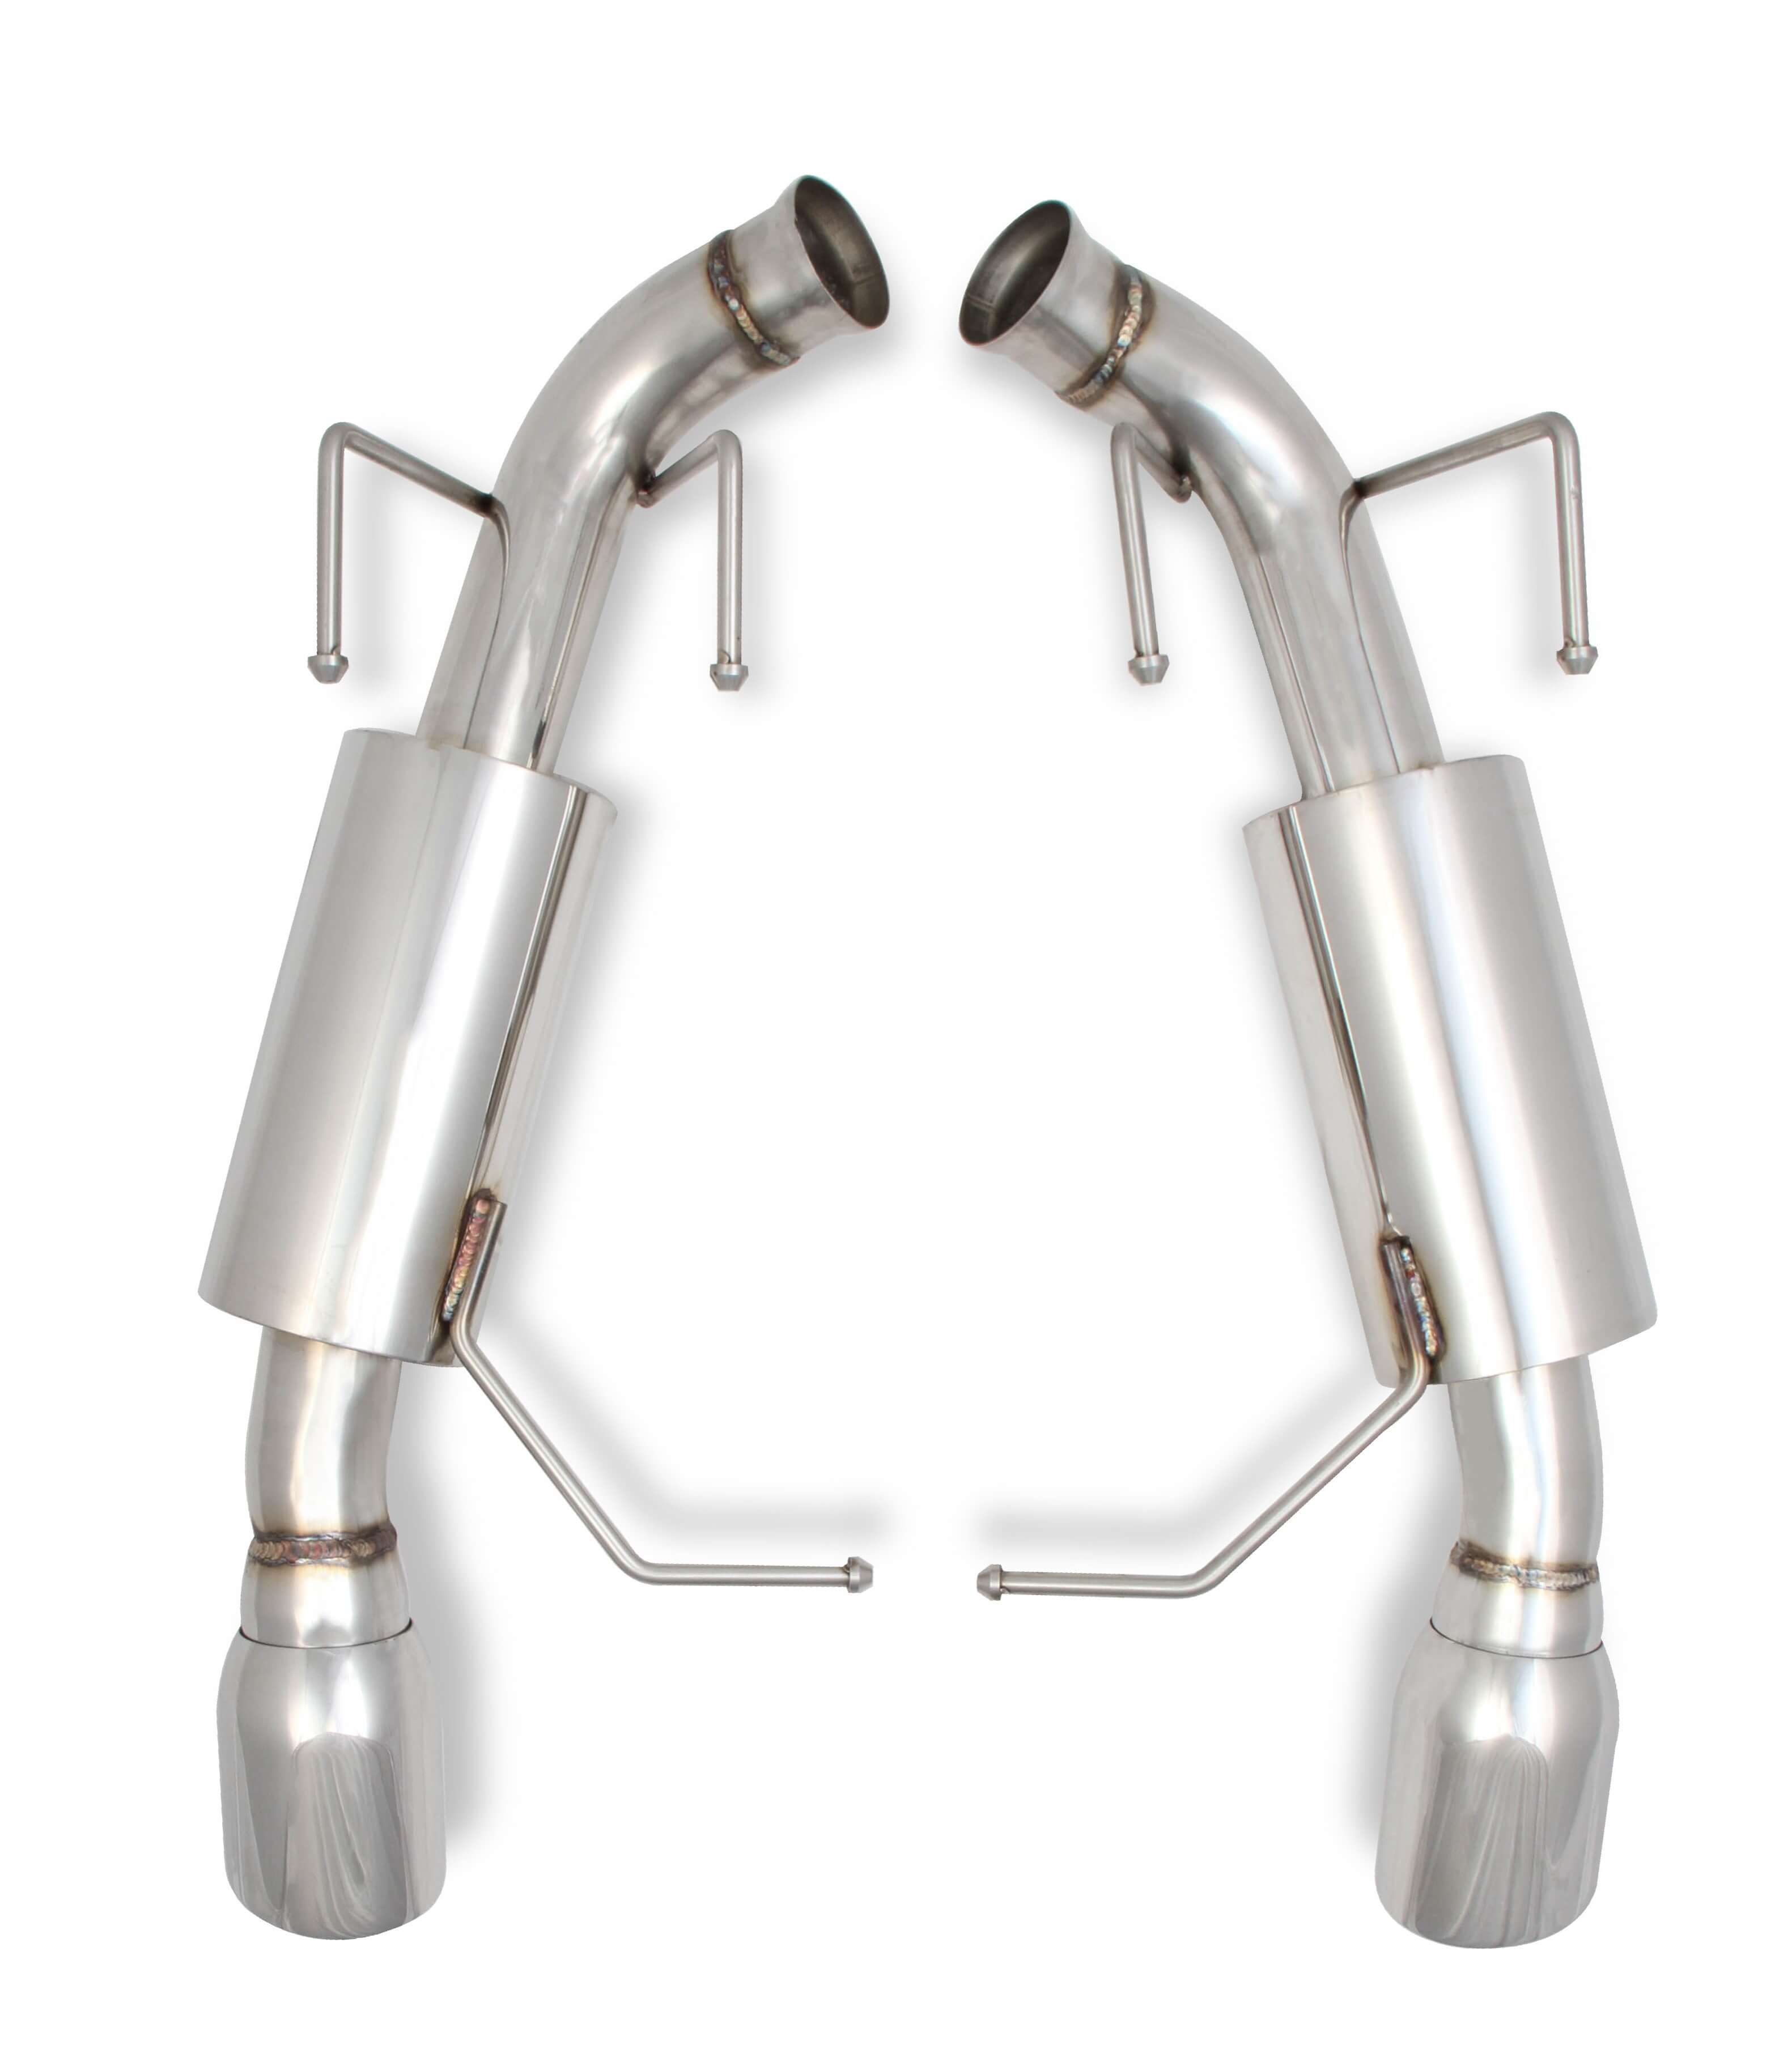 2011-2014 Ford Mustang 3.7L V6 Flowtech 2.25" Stainless Axle Back Exhaust System